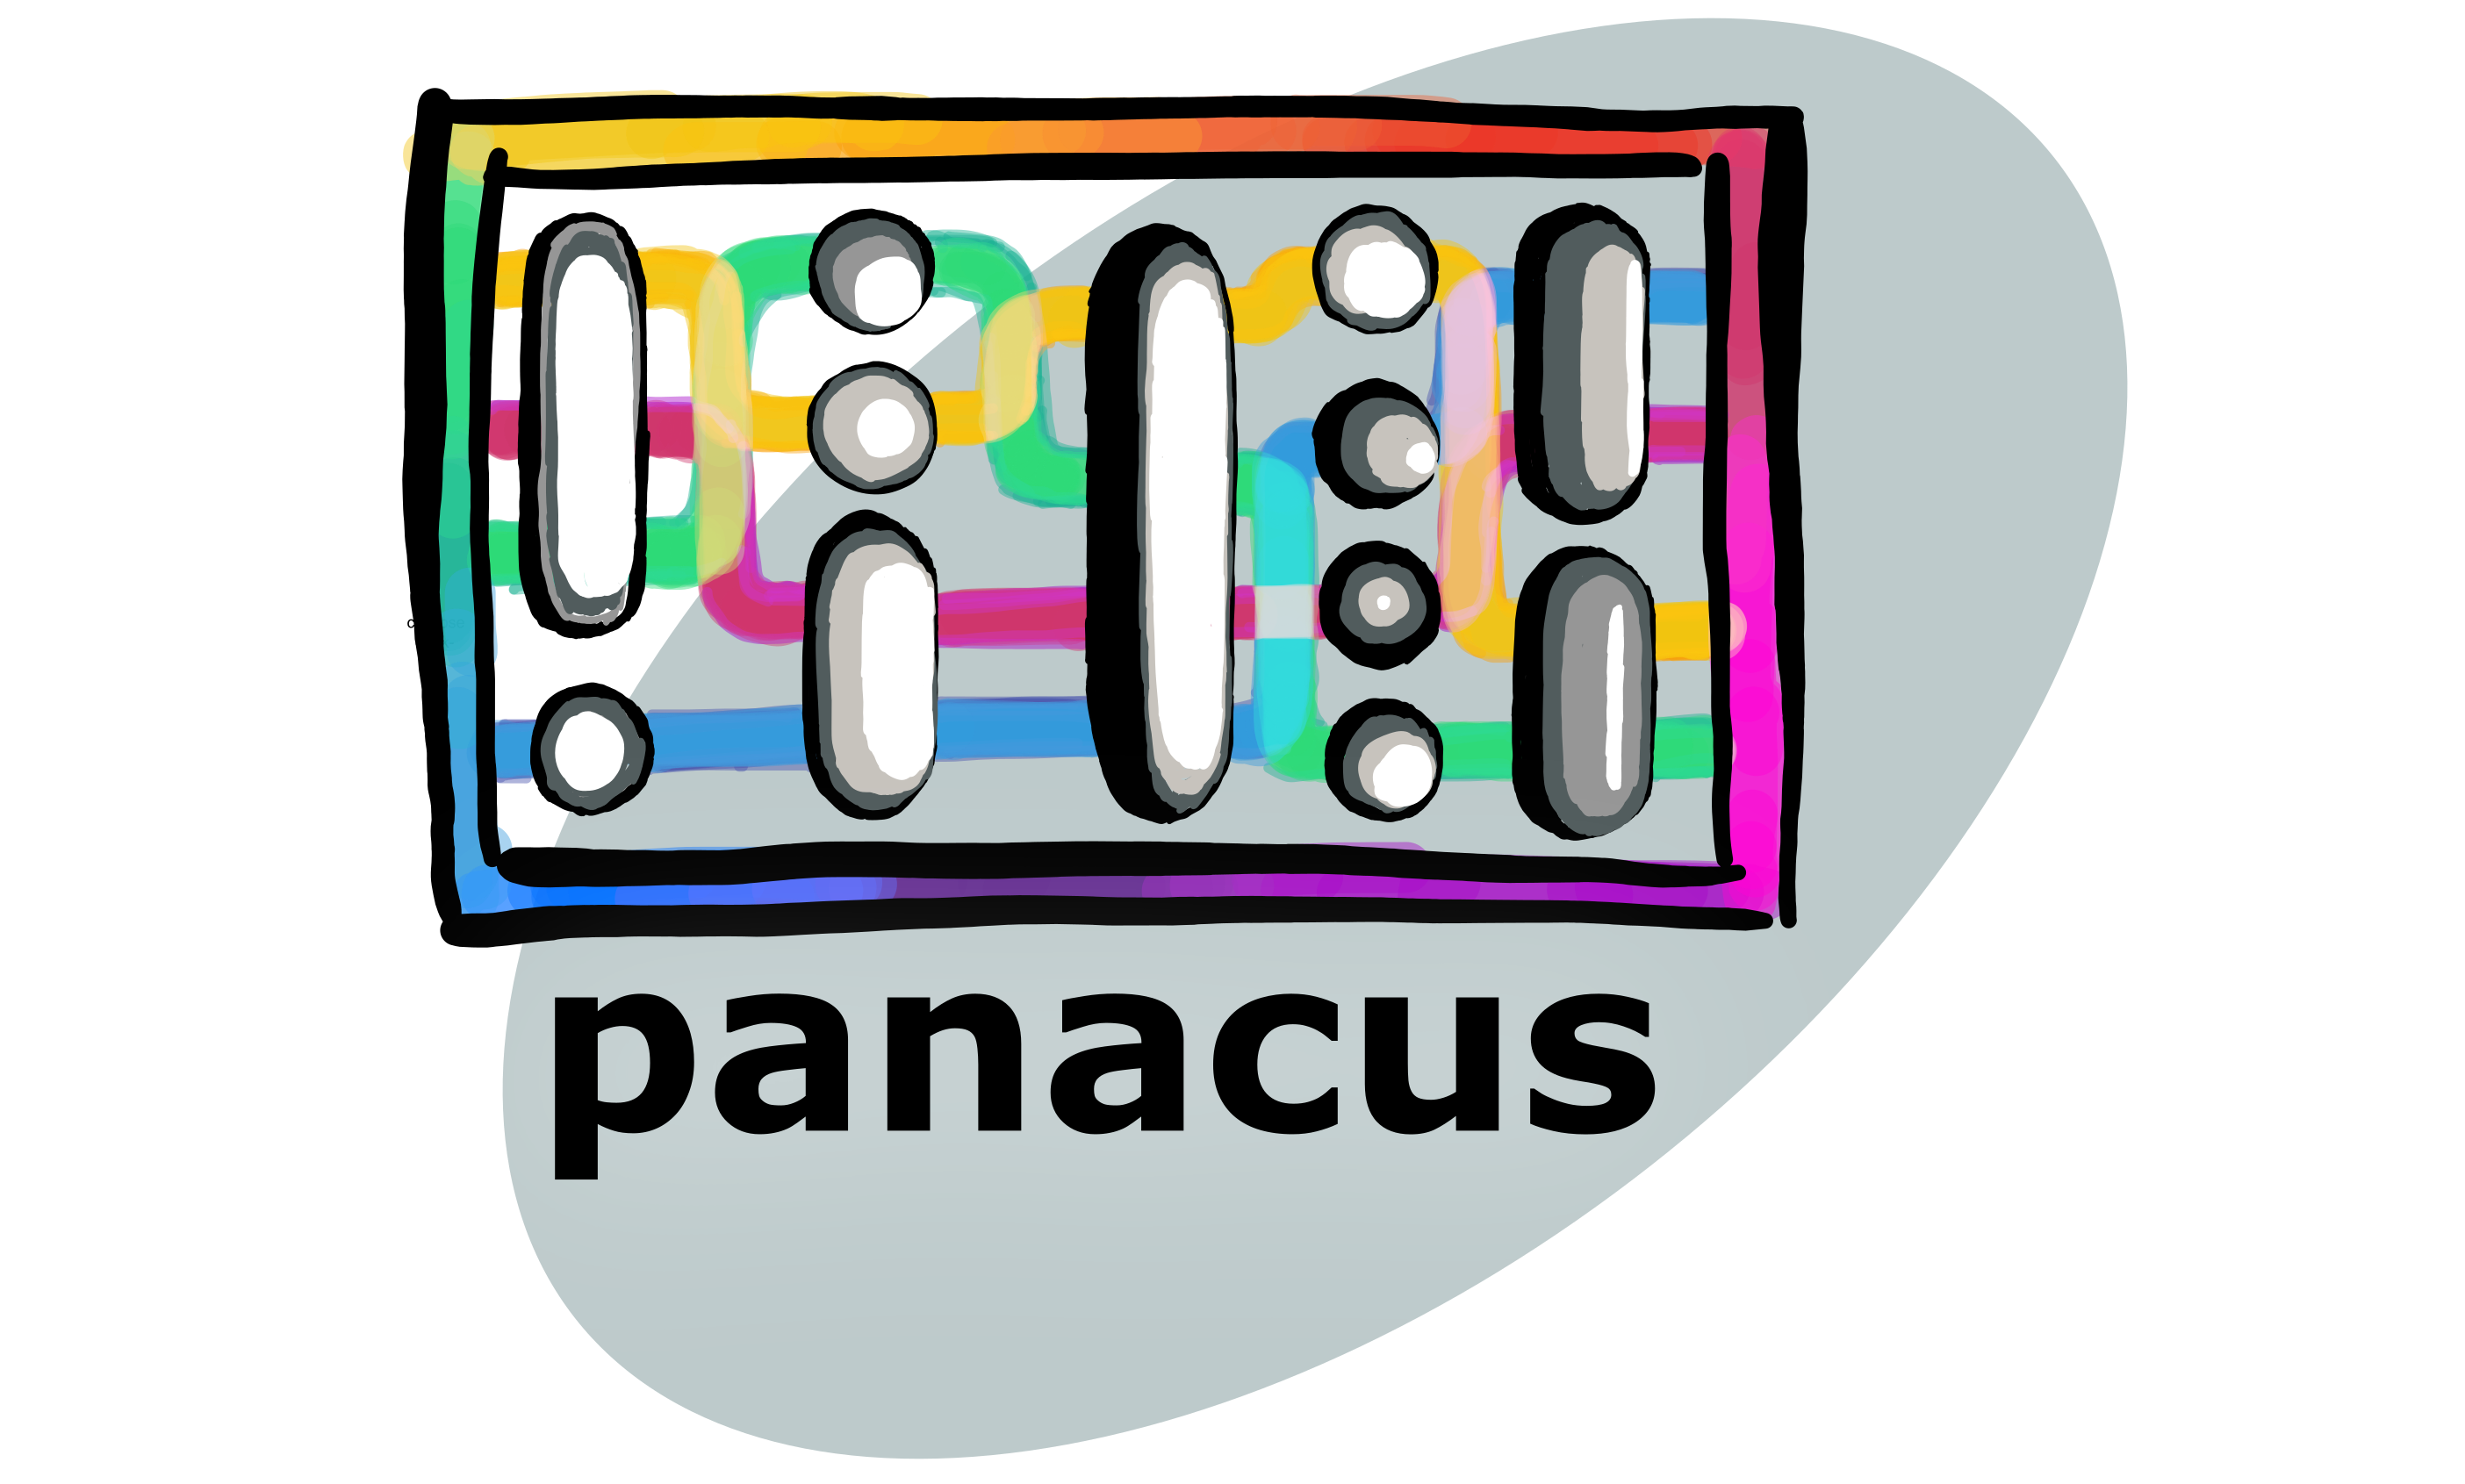 panacus is a counting tool for pangenome graphs